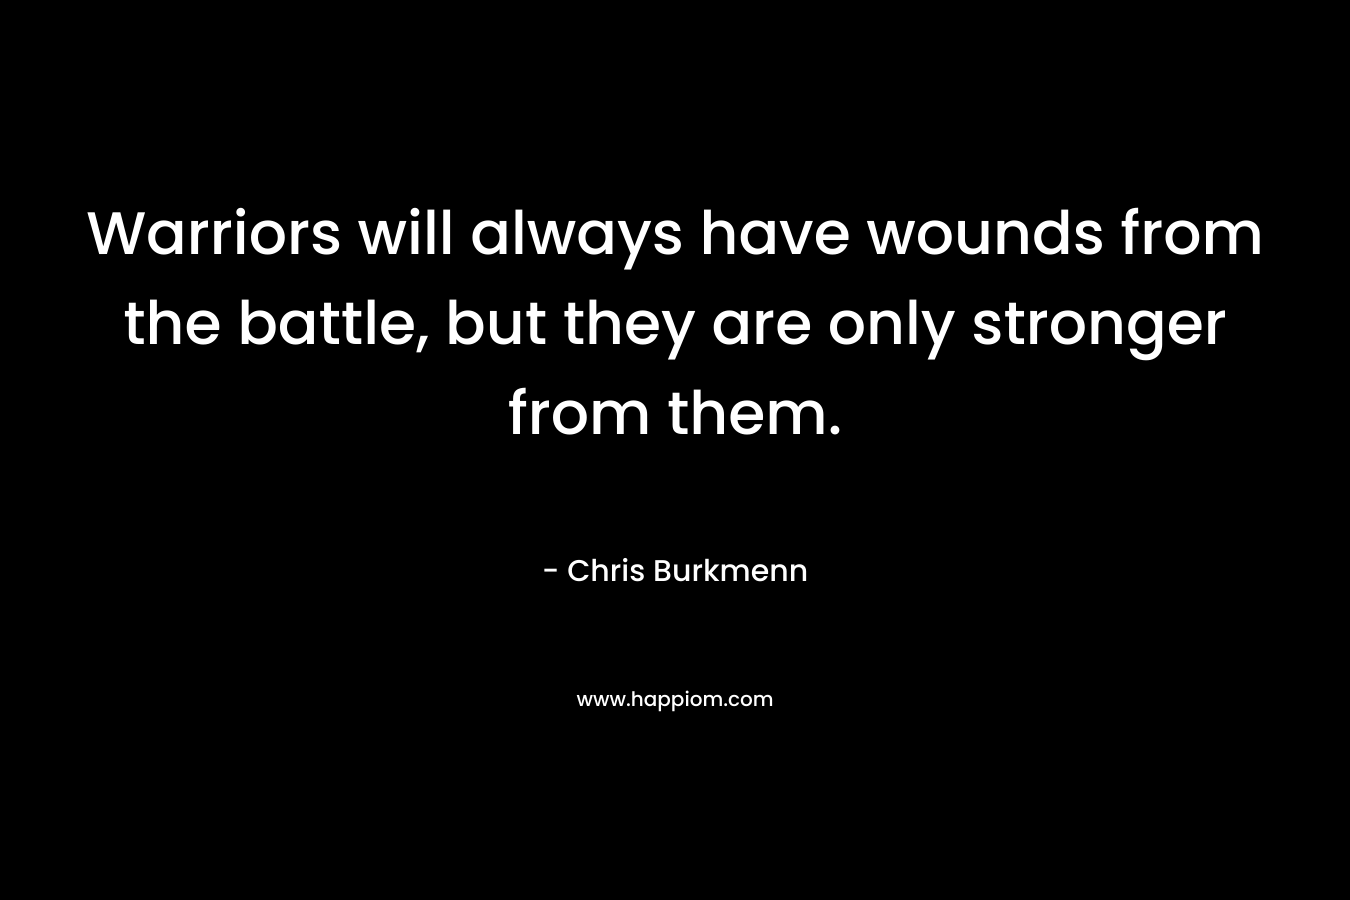 Warriors will always have wounds from the battle, but they are only stronger from them.